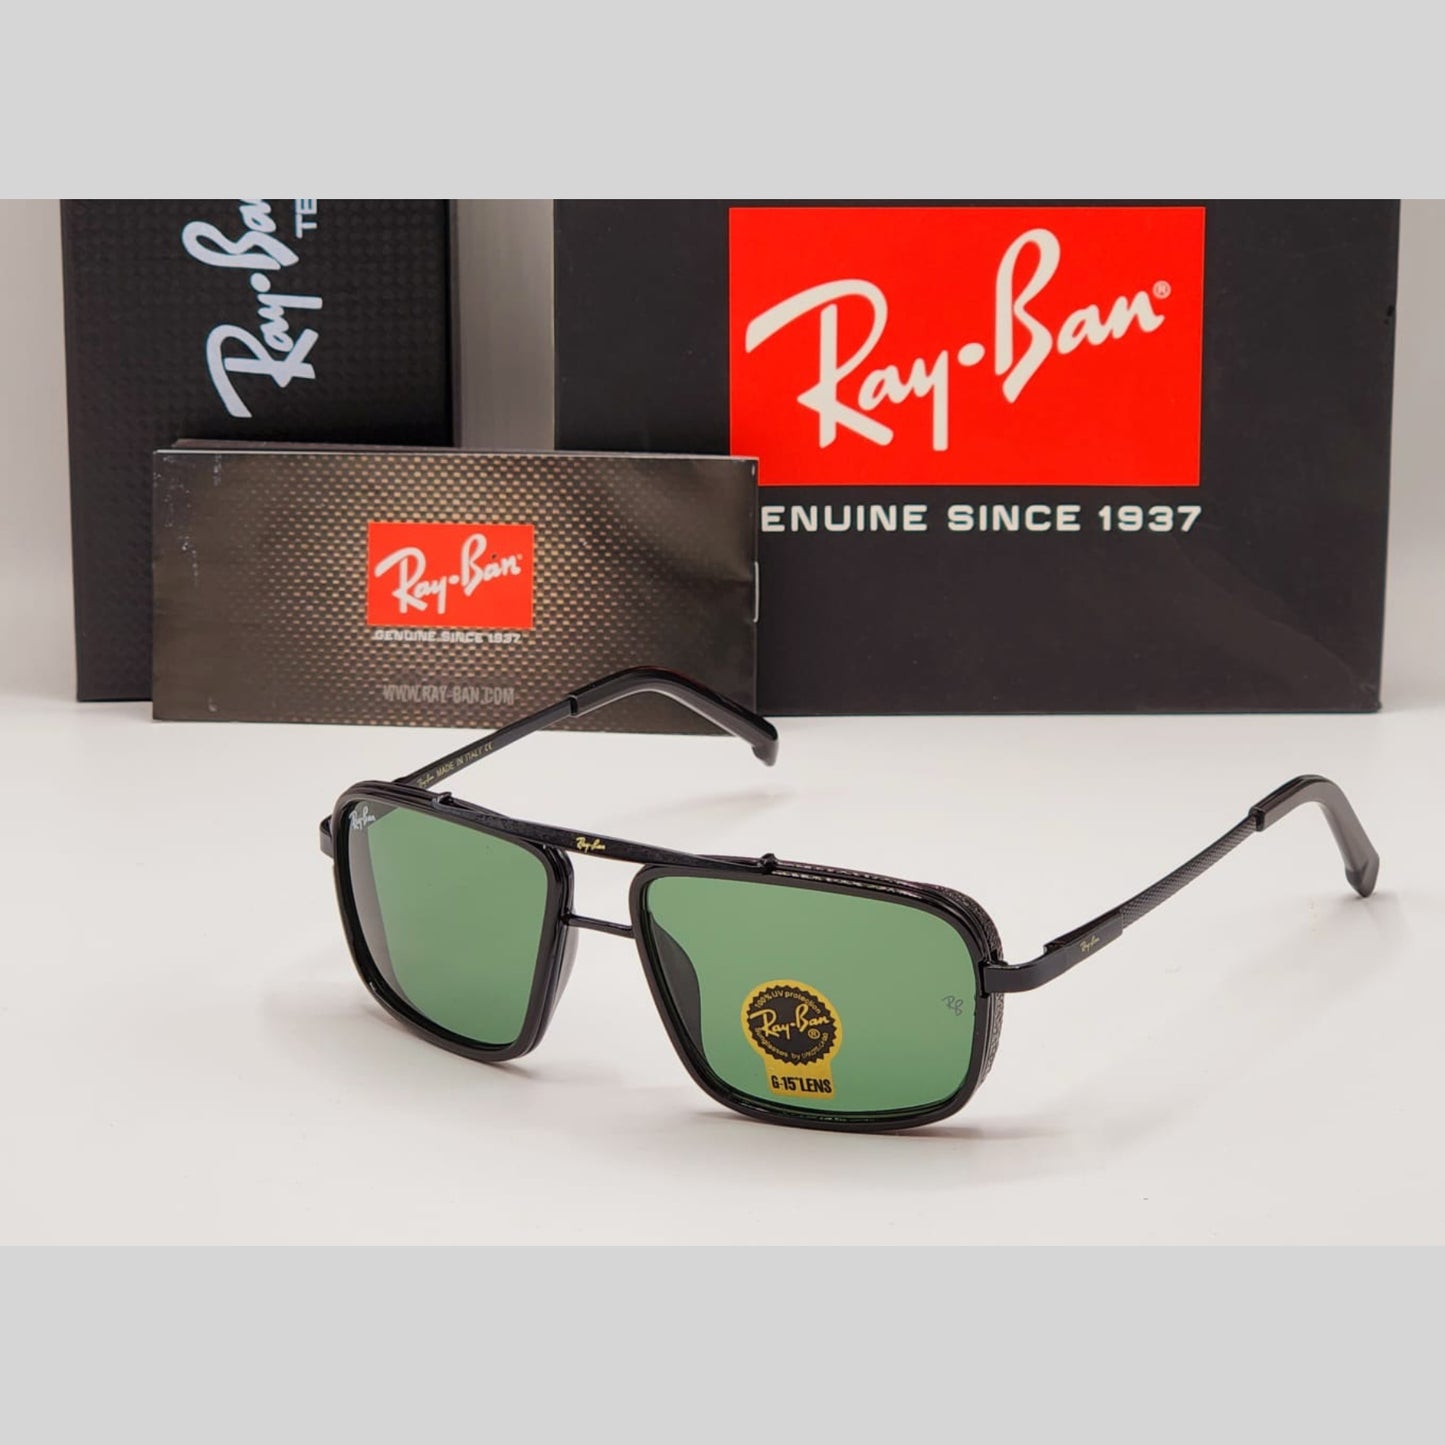 Green & Black 4413 Square Causal Latest Sunglass For Unisex.